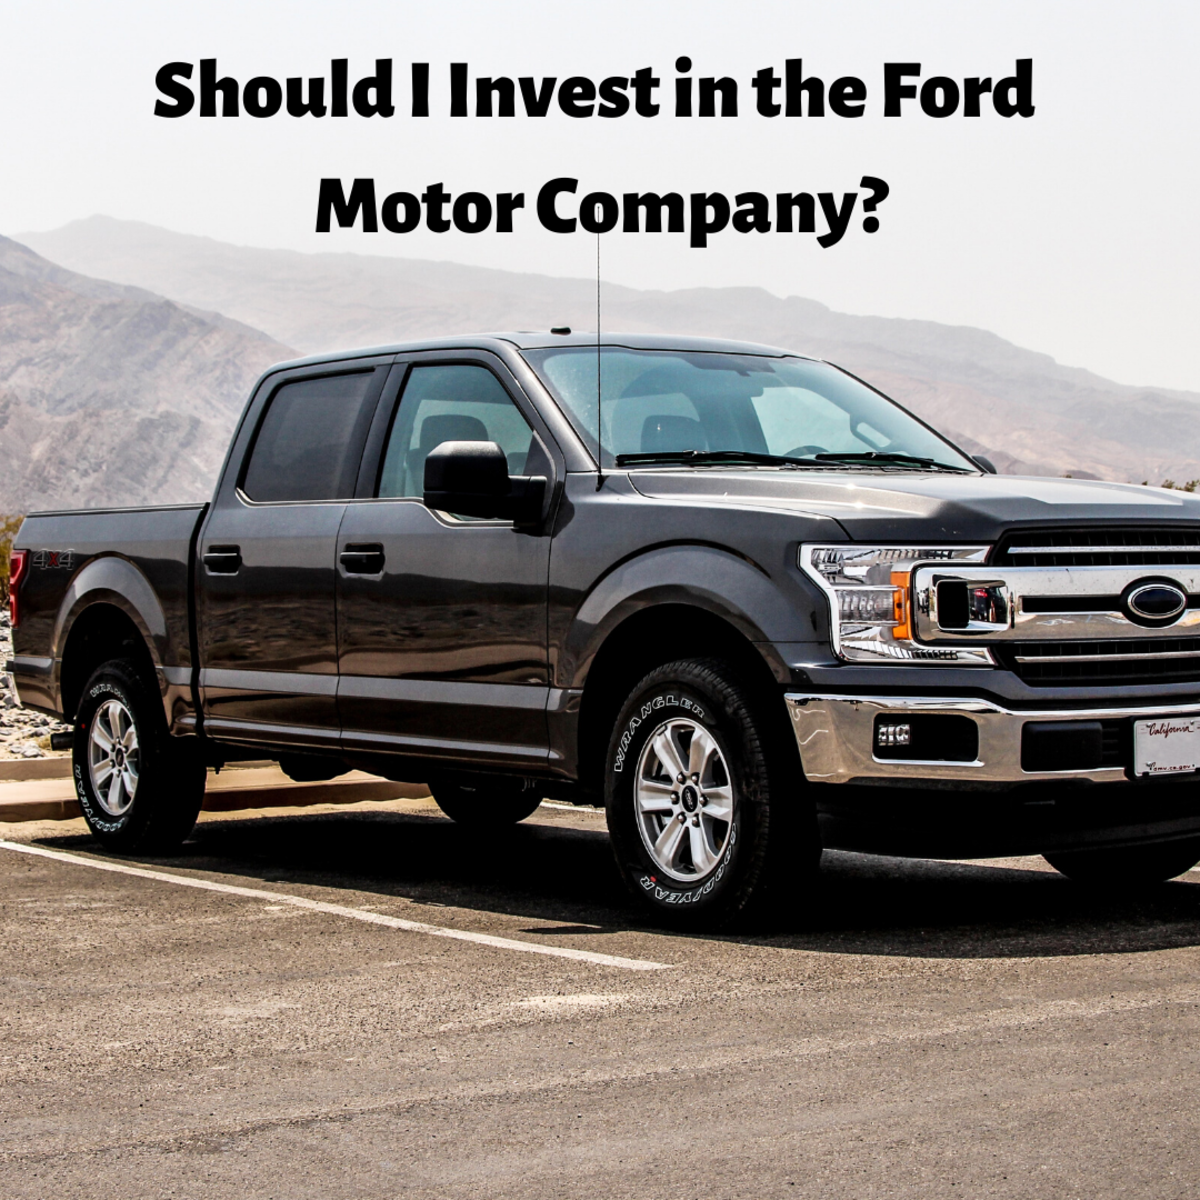 Should I Invest in Shares in the Ford Motor Company?